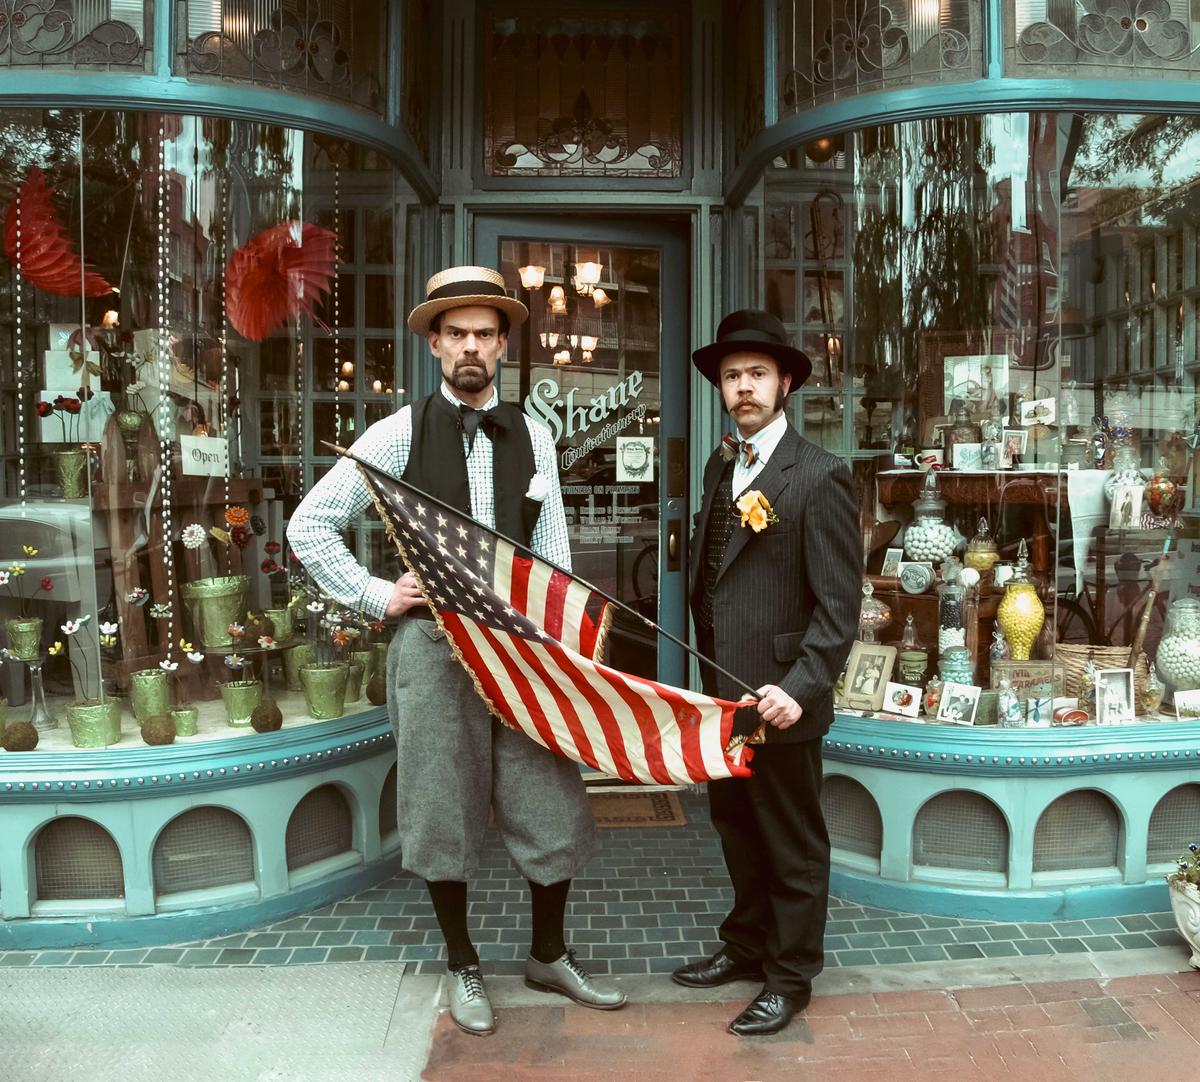 Brothers Ryan (L)<br/>and Eric Berley<br/>bought the historic<br/>candy shop in 2010. (Courtesy of Shane Confectionery)